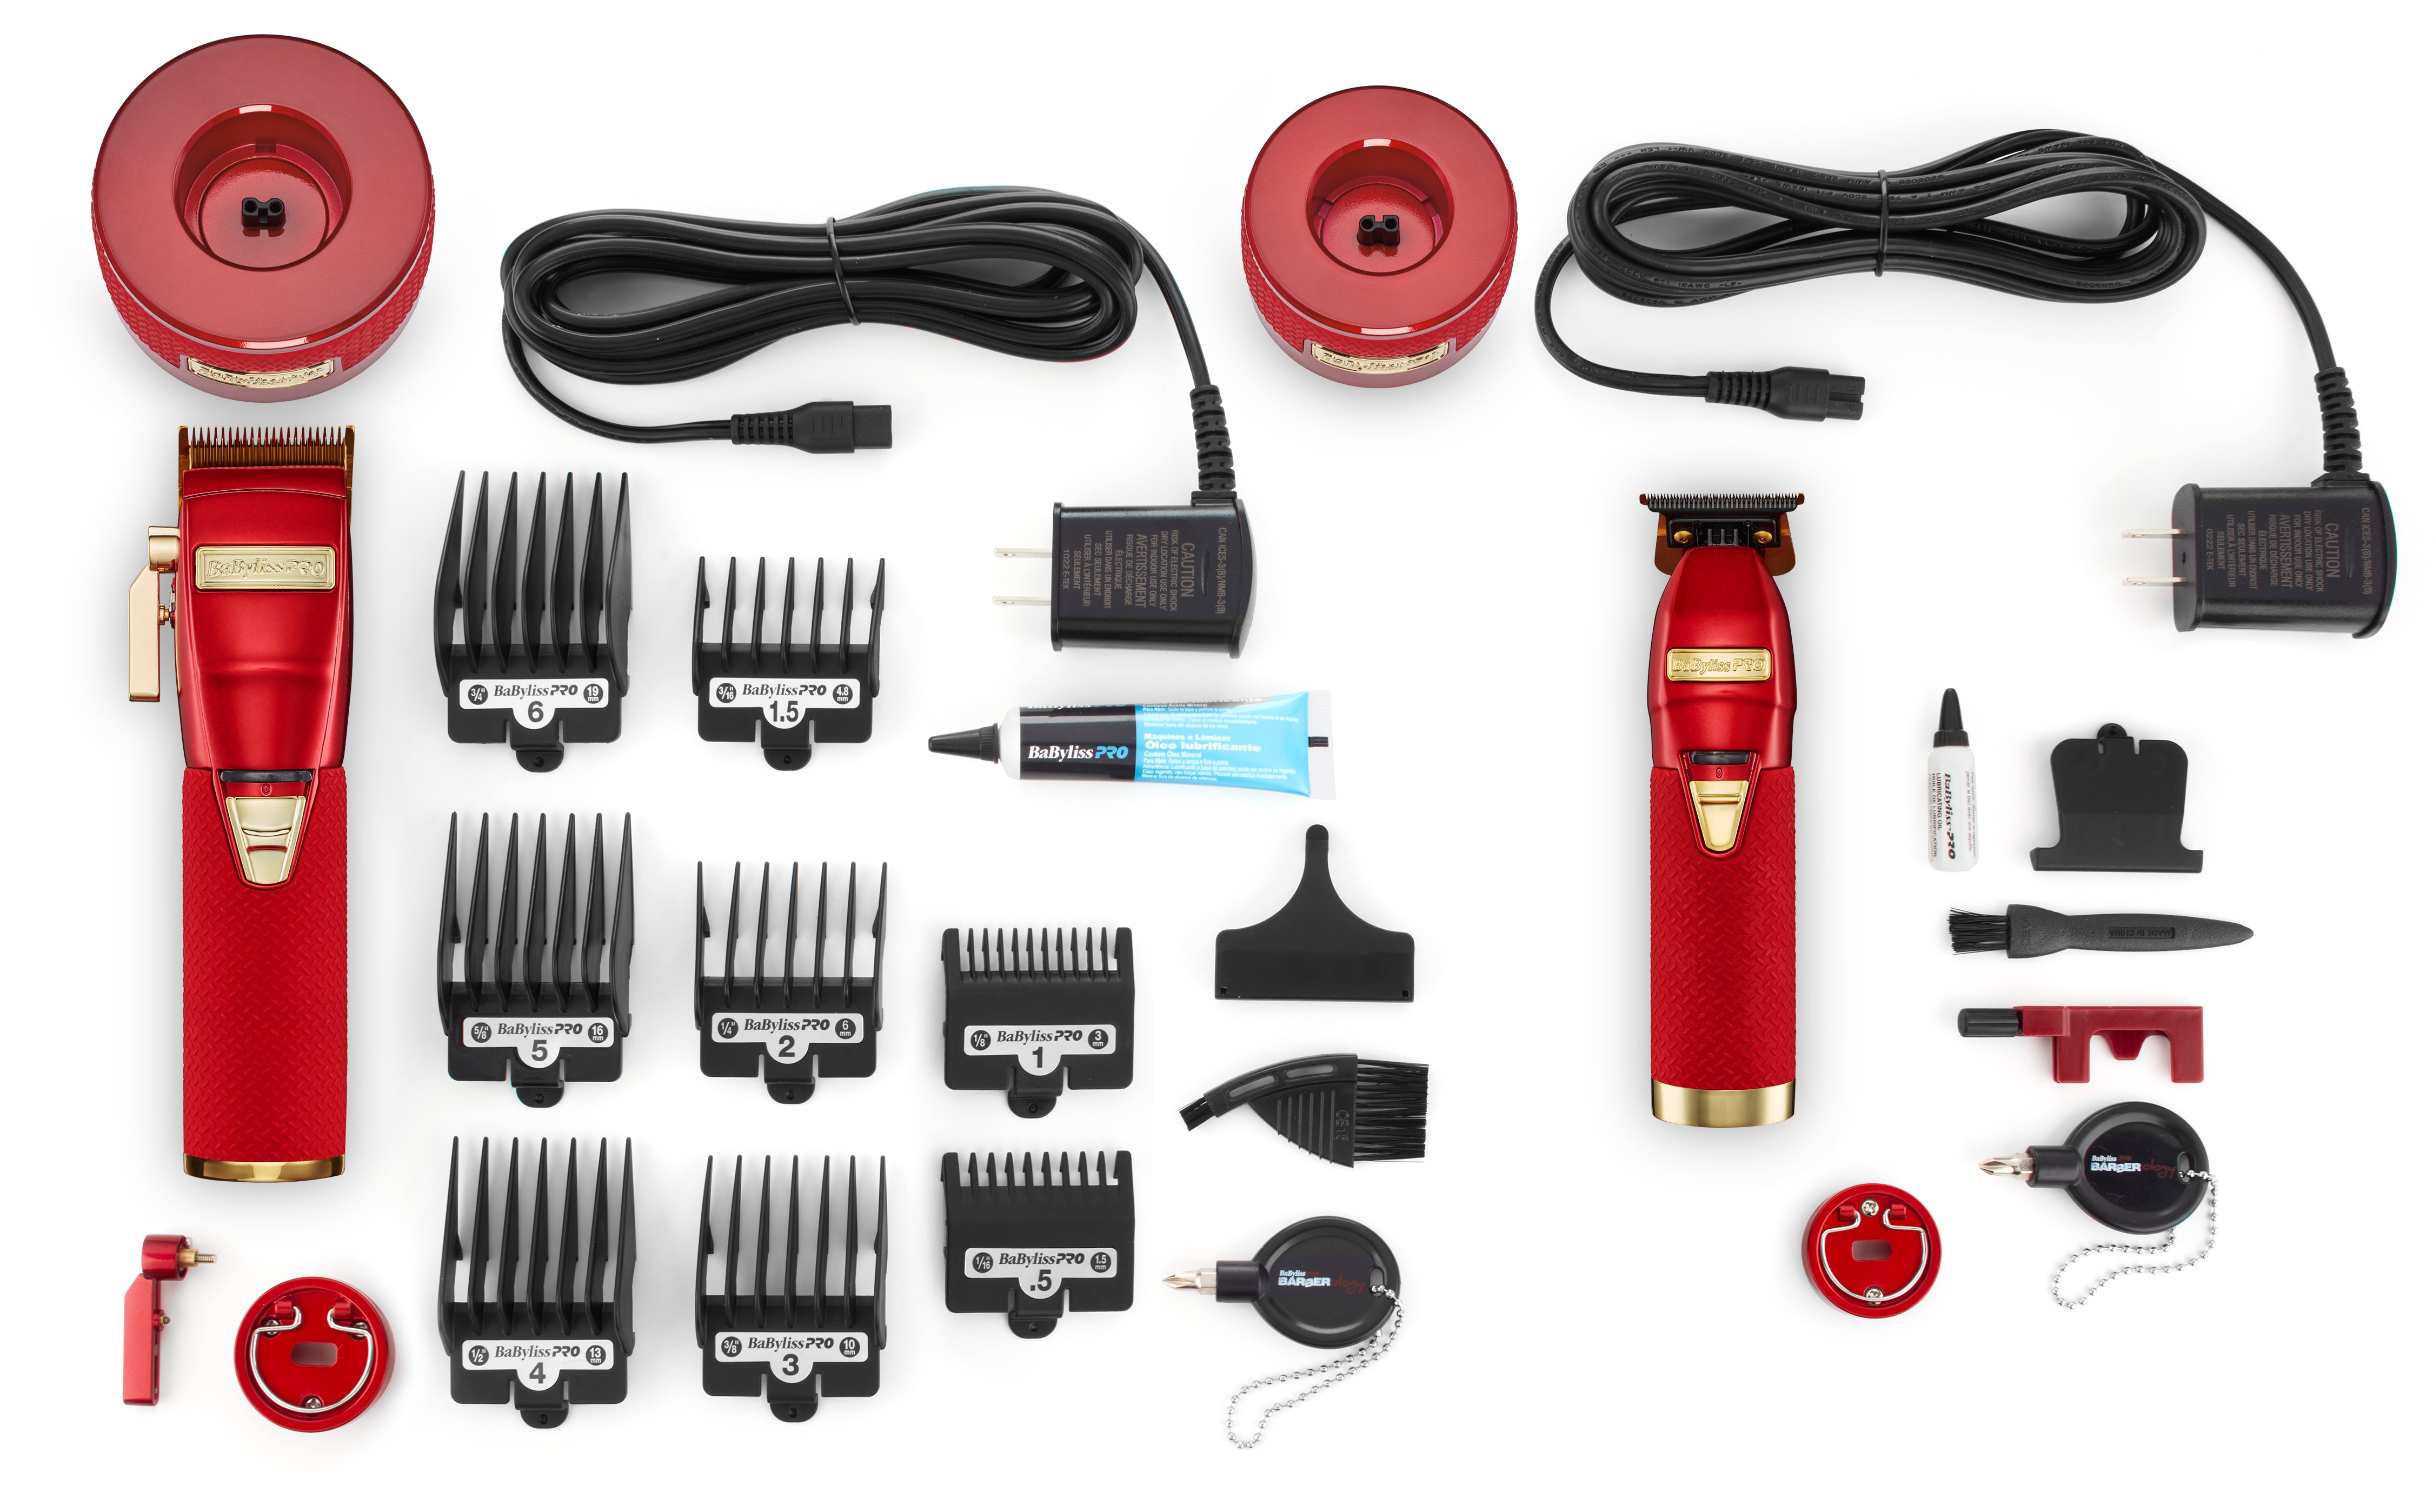 Babyliss LimitedFX Boost+ Collection with clipper, Trimmer & Charging Base Set - Red